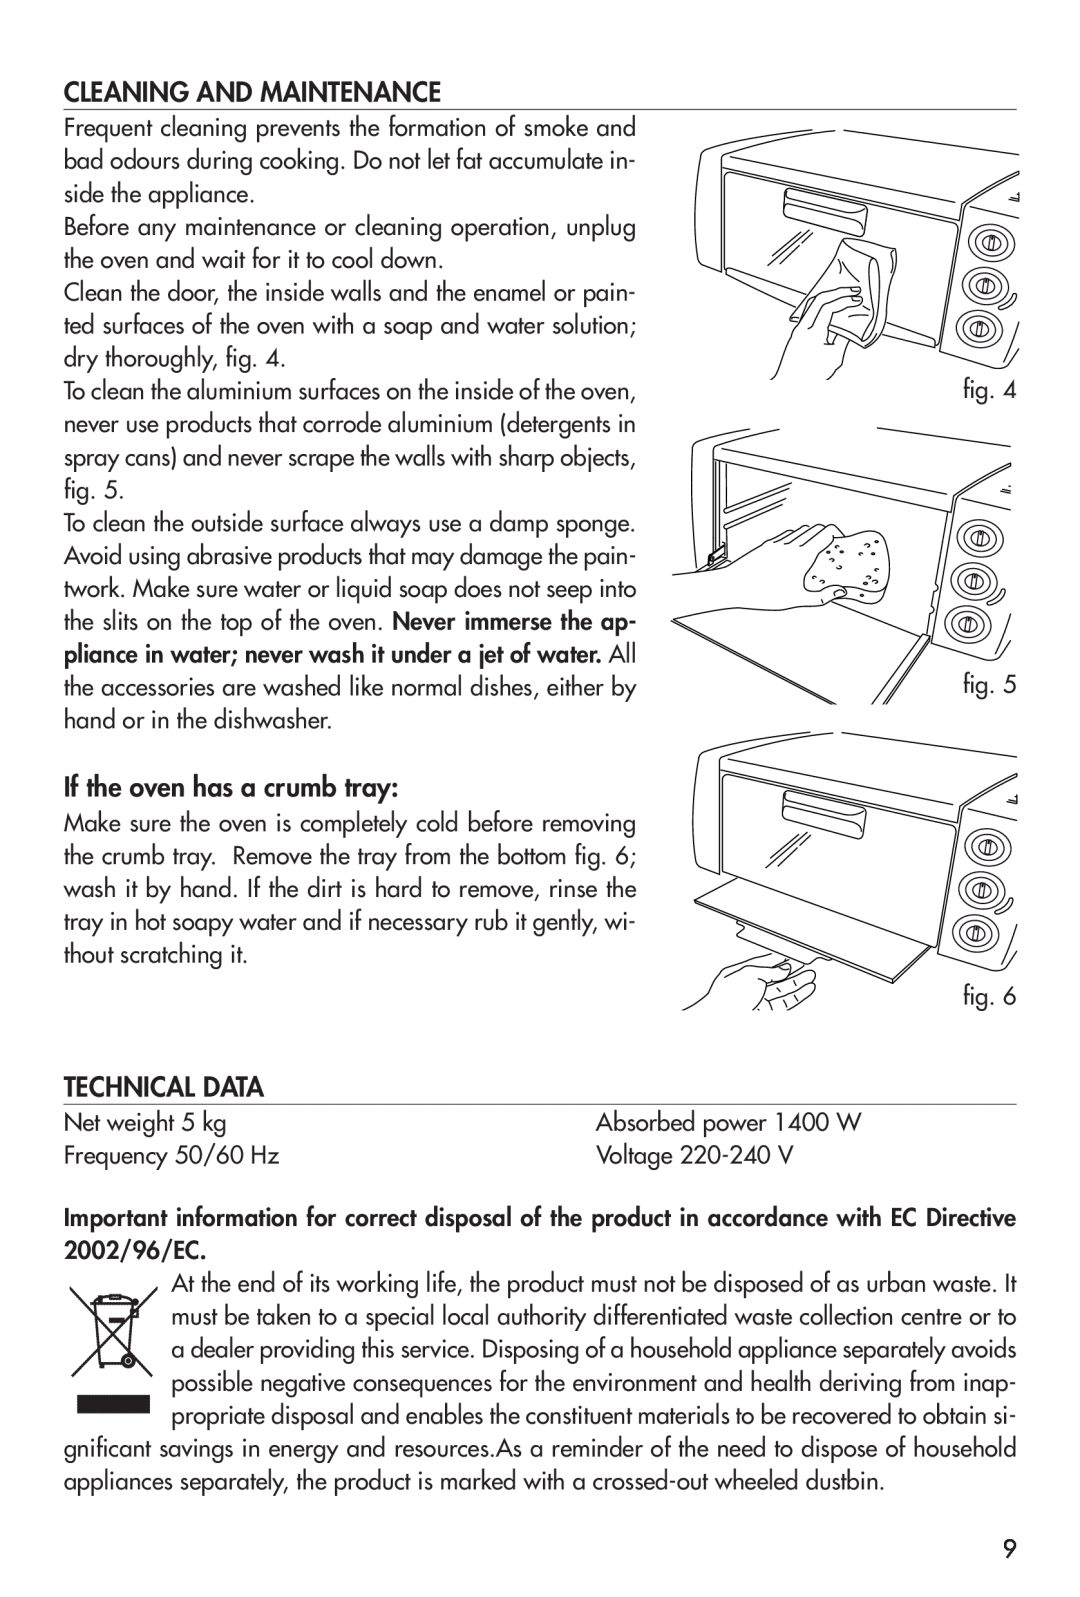 DeLonghi EO12001 manual Cleaning And Maintenance, If the oven has a crumb tray, Technical Data 